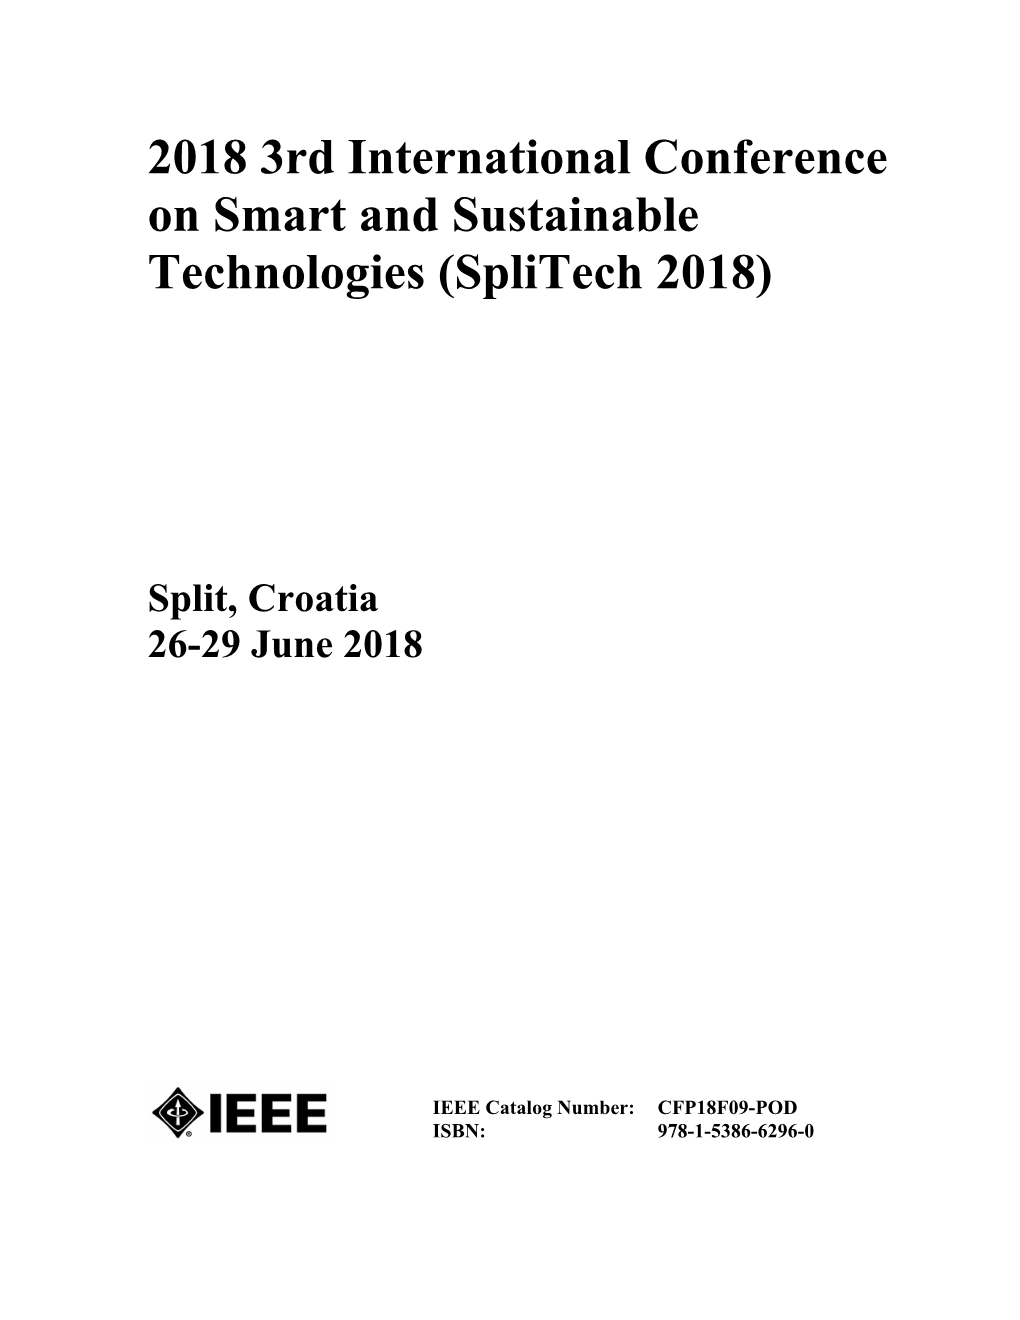 2018 3Rd International Conference on Smart and Sustainable Technologies